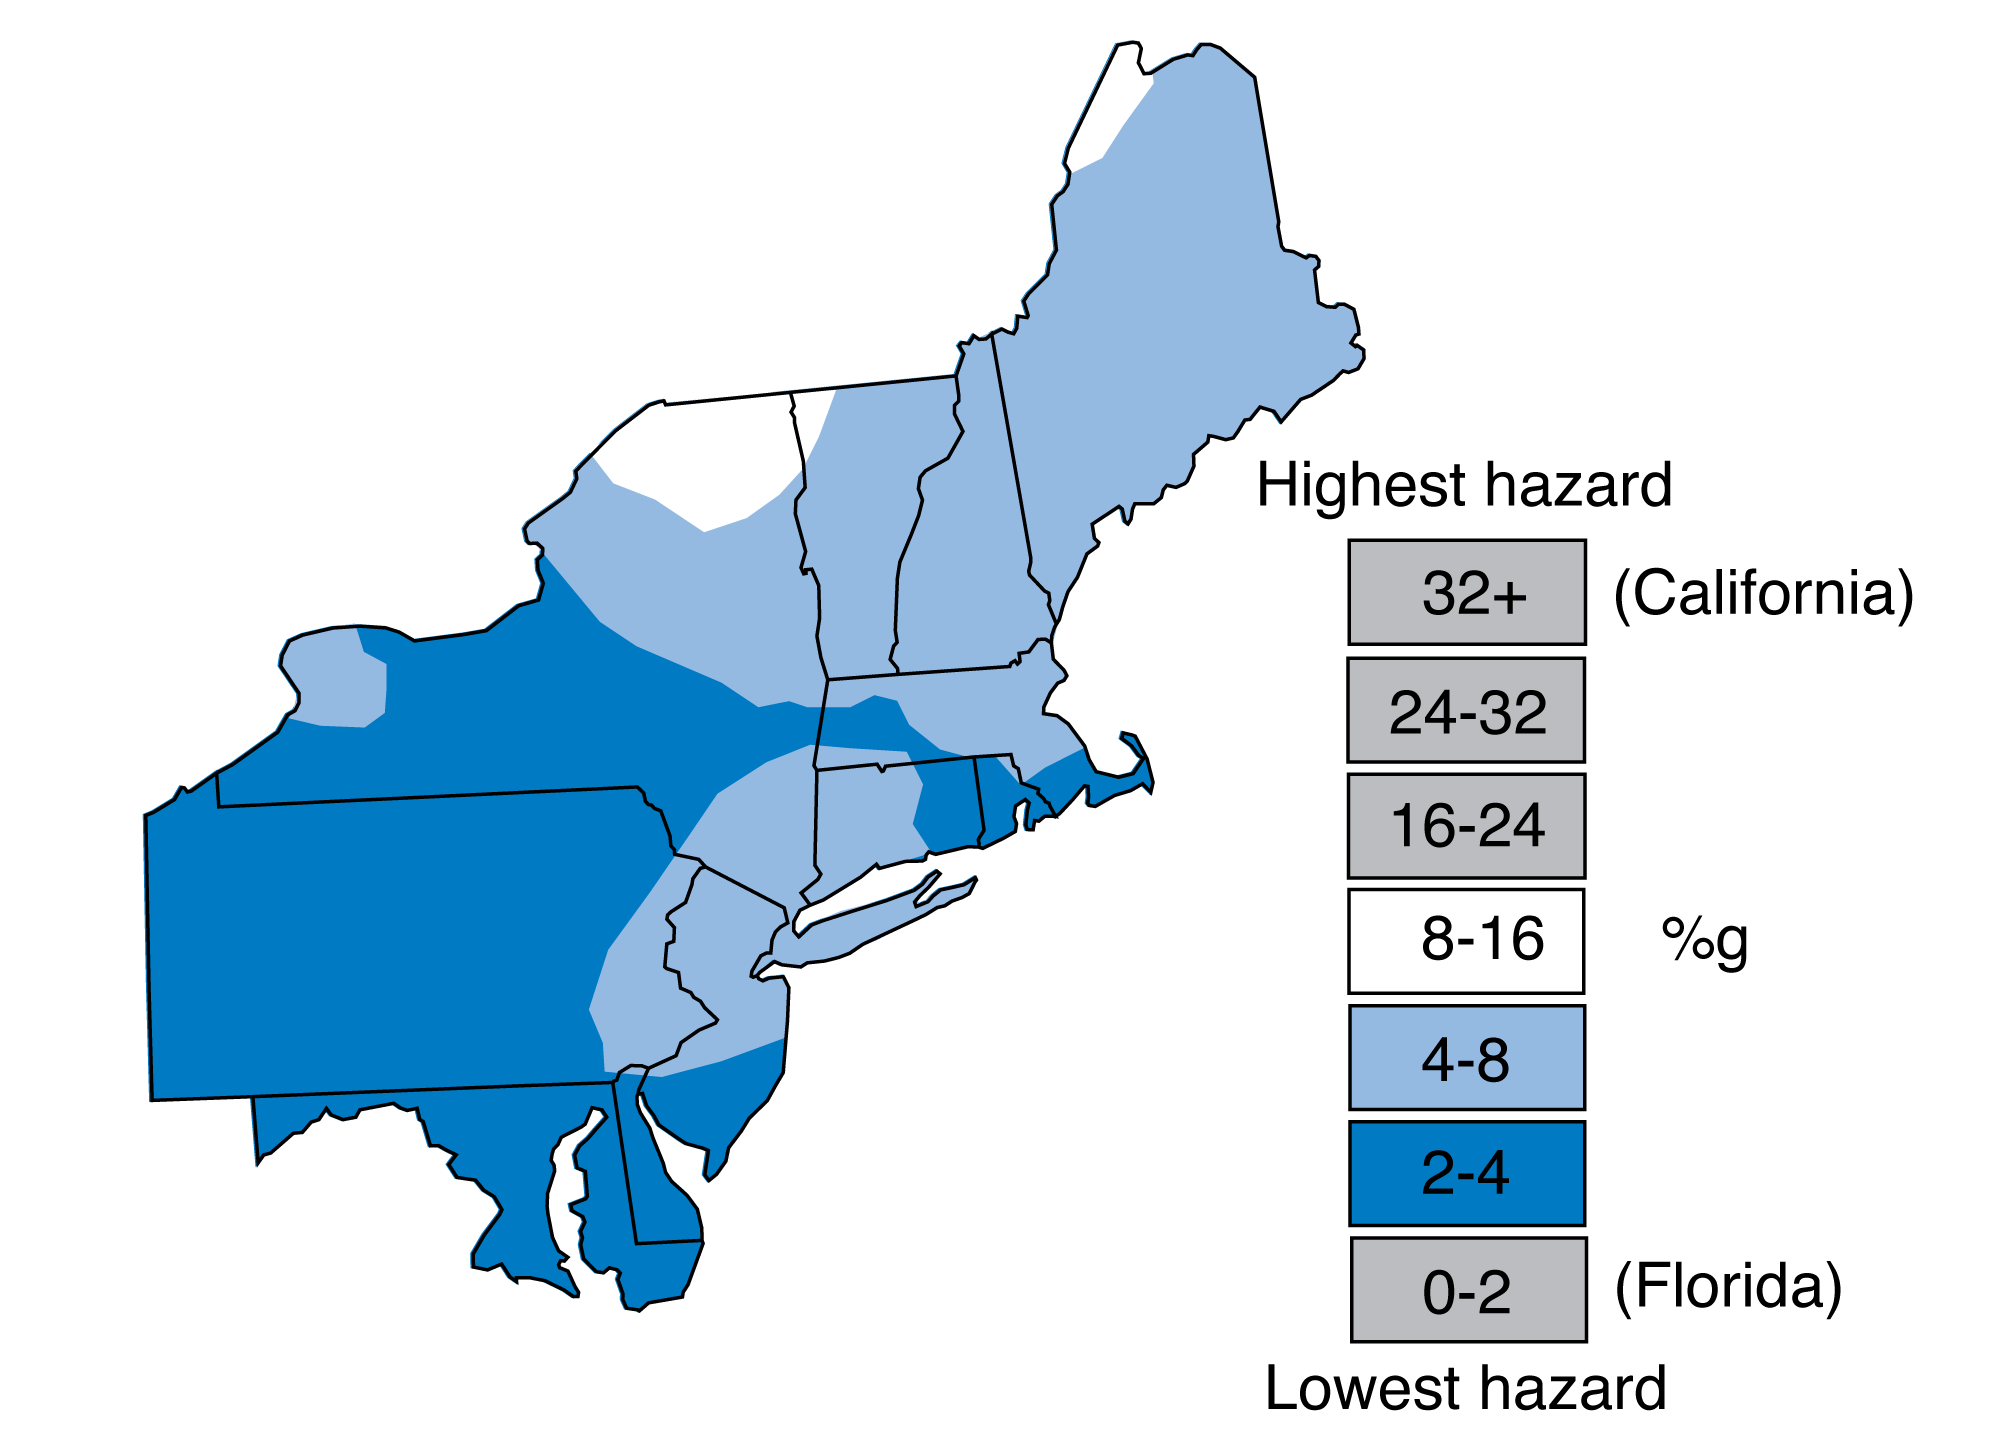 Map of the northeastern United States shaded blue and white to show earthquake risk. White areas in northeastern New York state, northwestern Vermont, and northern Main have the highest risk, whereas Most of Maryland, Delaware, much of Pennsylvania and New York, and parts of New England have the lowest risk. The risk in the Northeast is far less than in California but higher than in Florida.